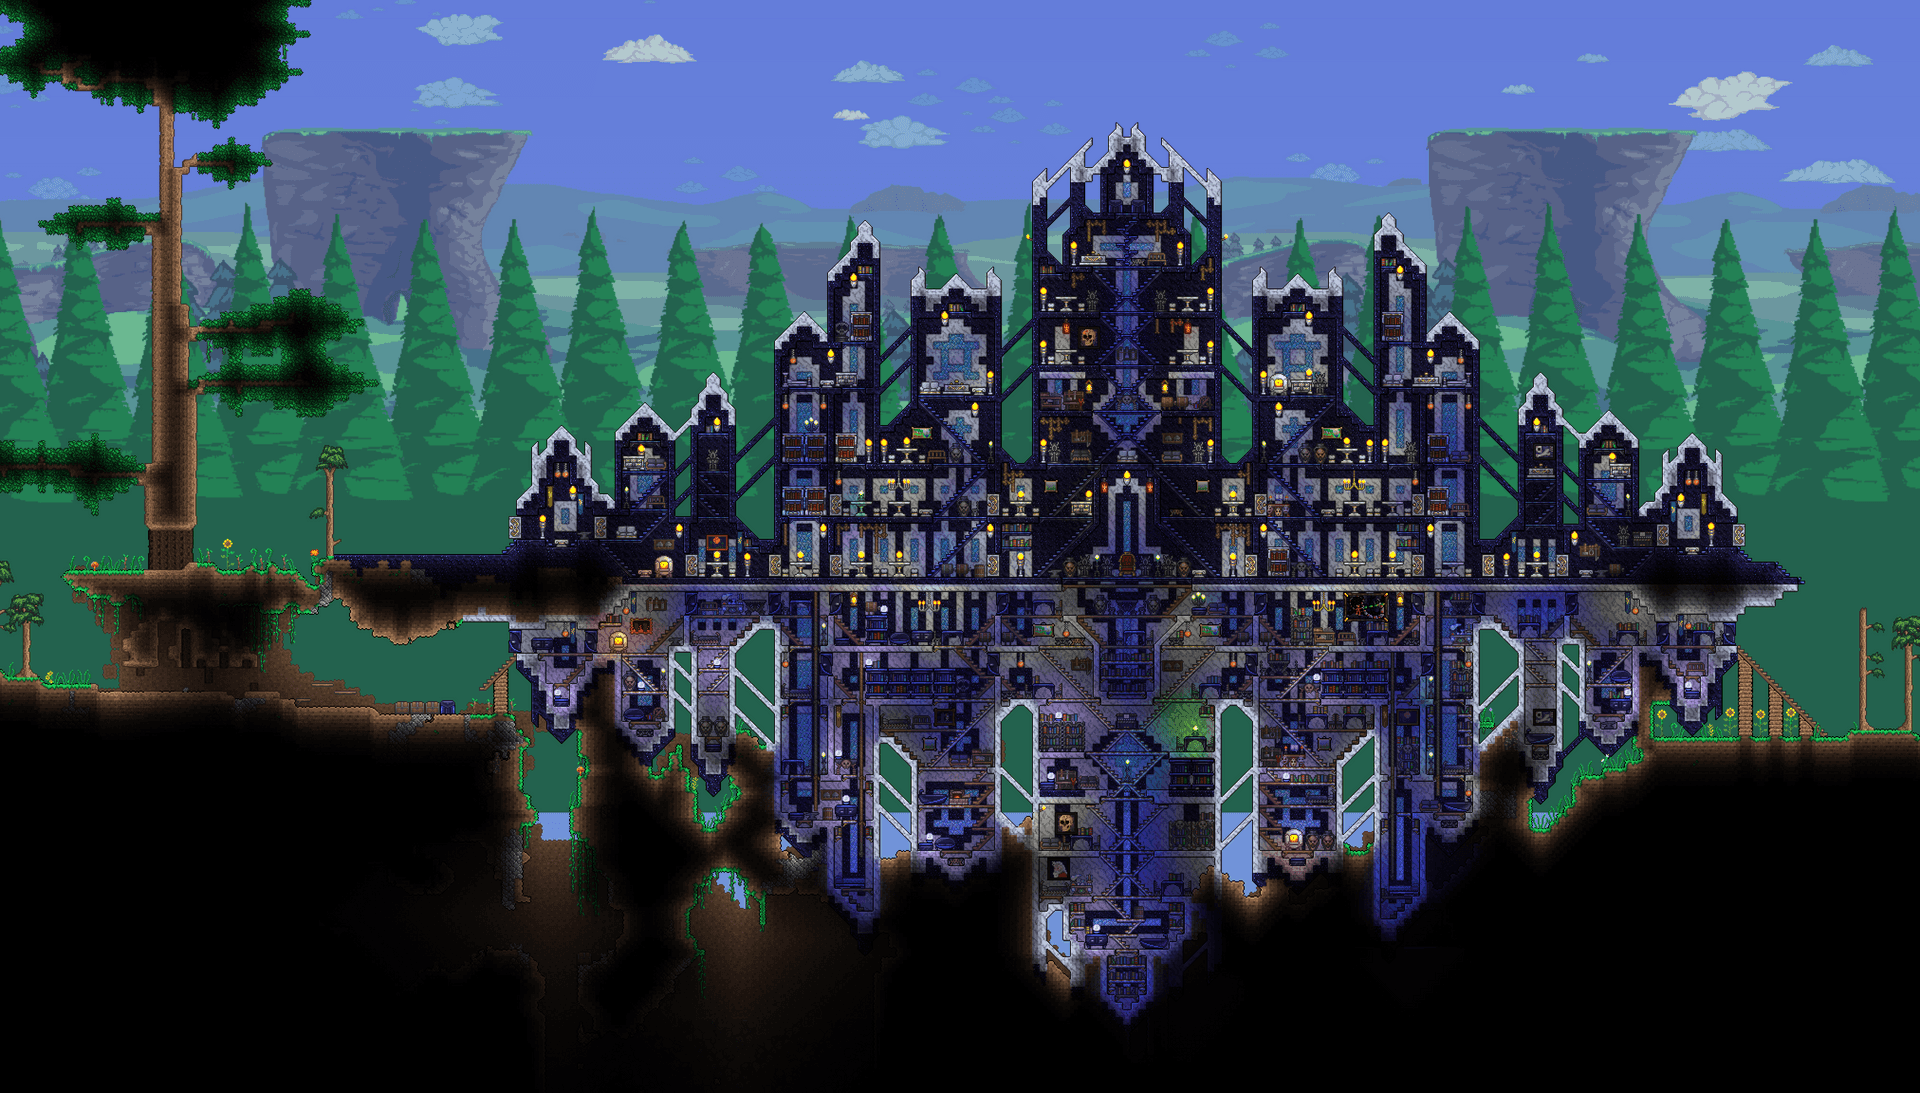 "Be The Adventurer You Always Wanted To Be With Terraria"